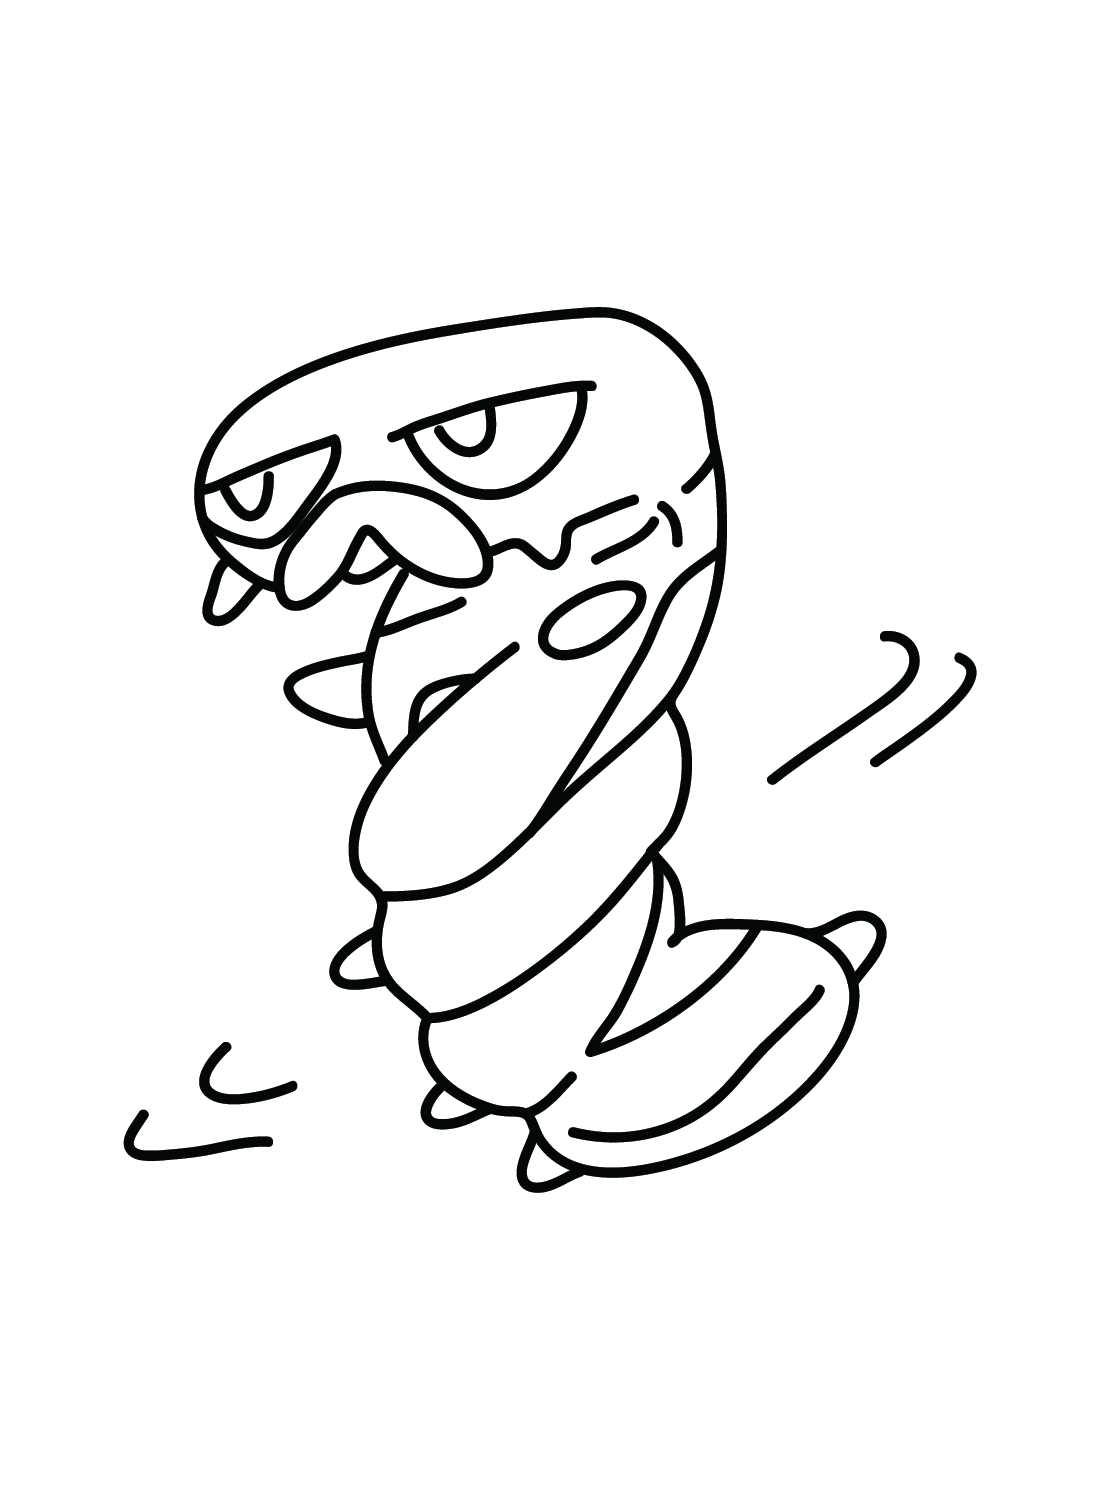 Sizzlipede Funny Coloring Page